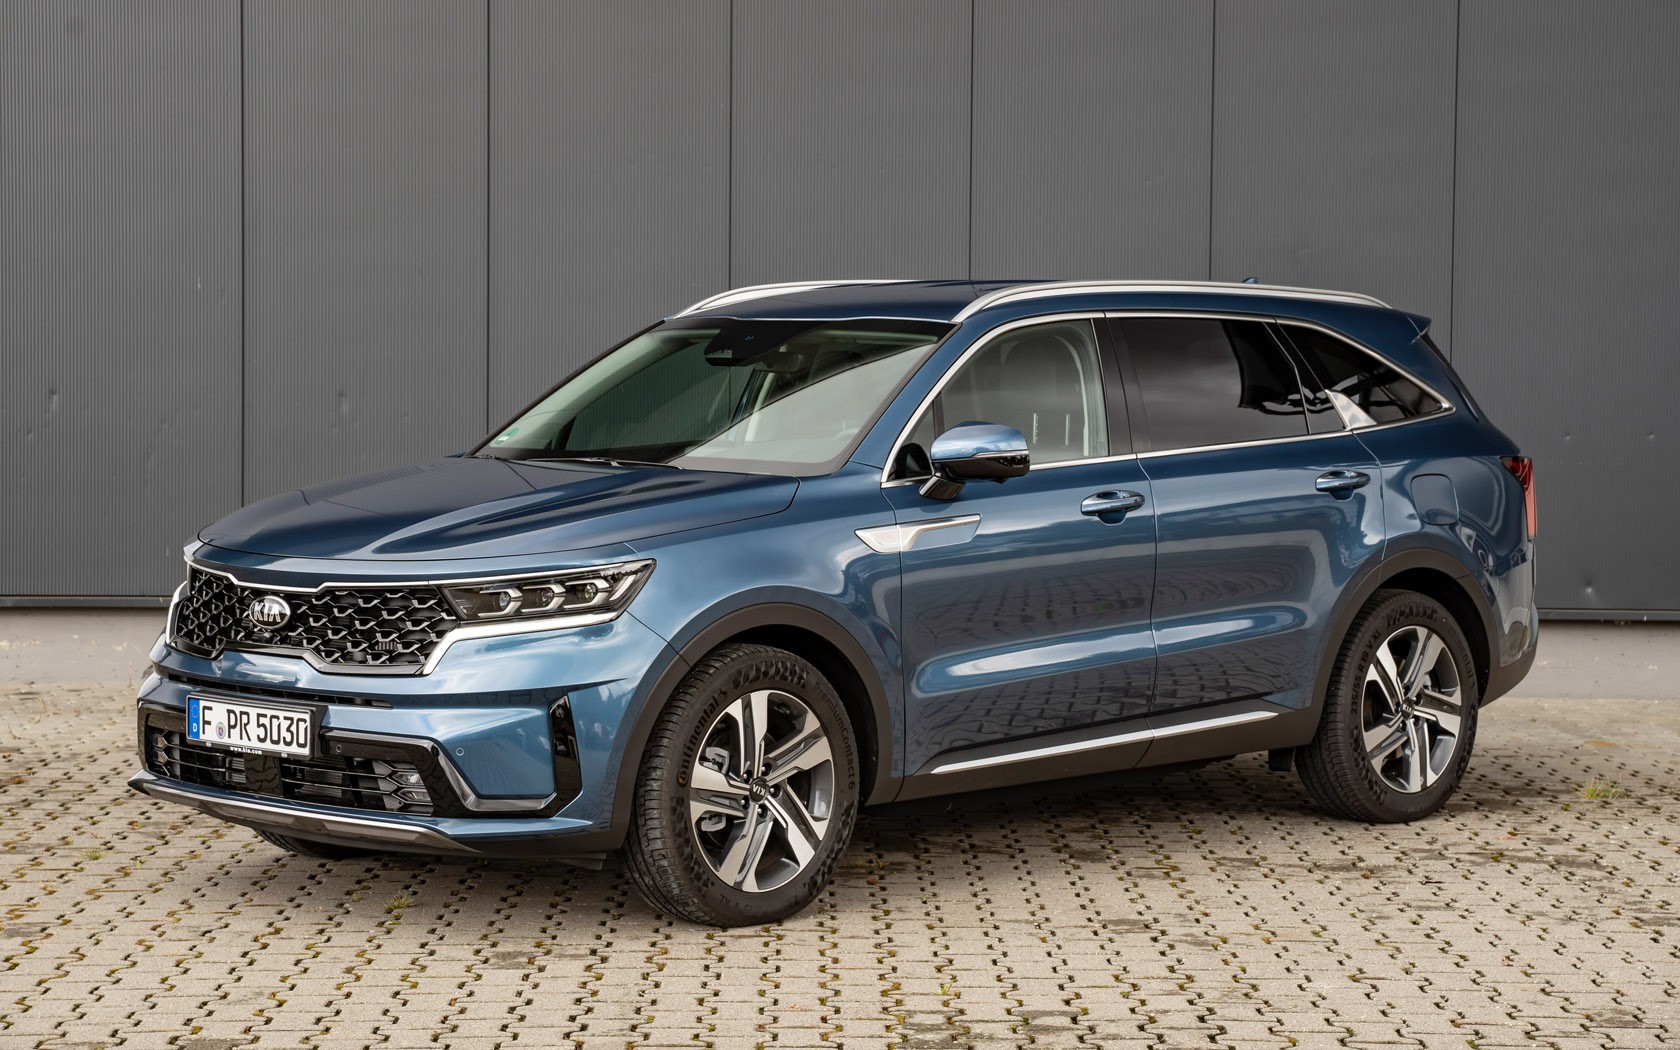 A Look at the New Platform and PHEV Powertrain of the 2021 Kia Sorento ...